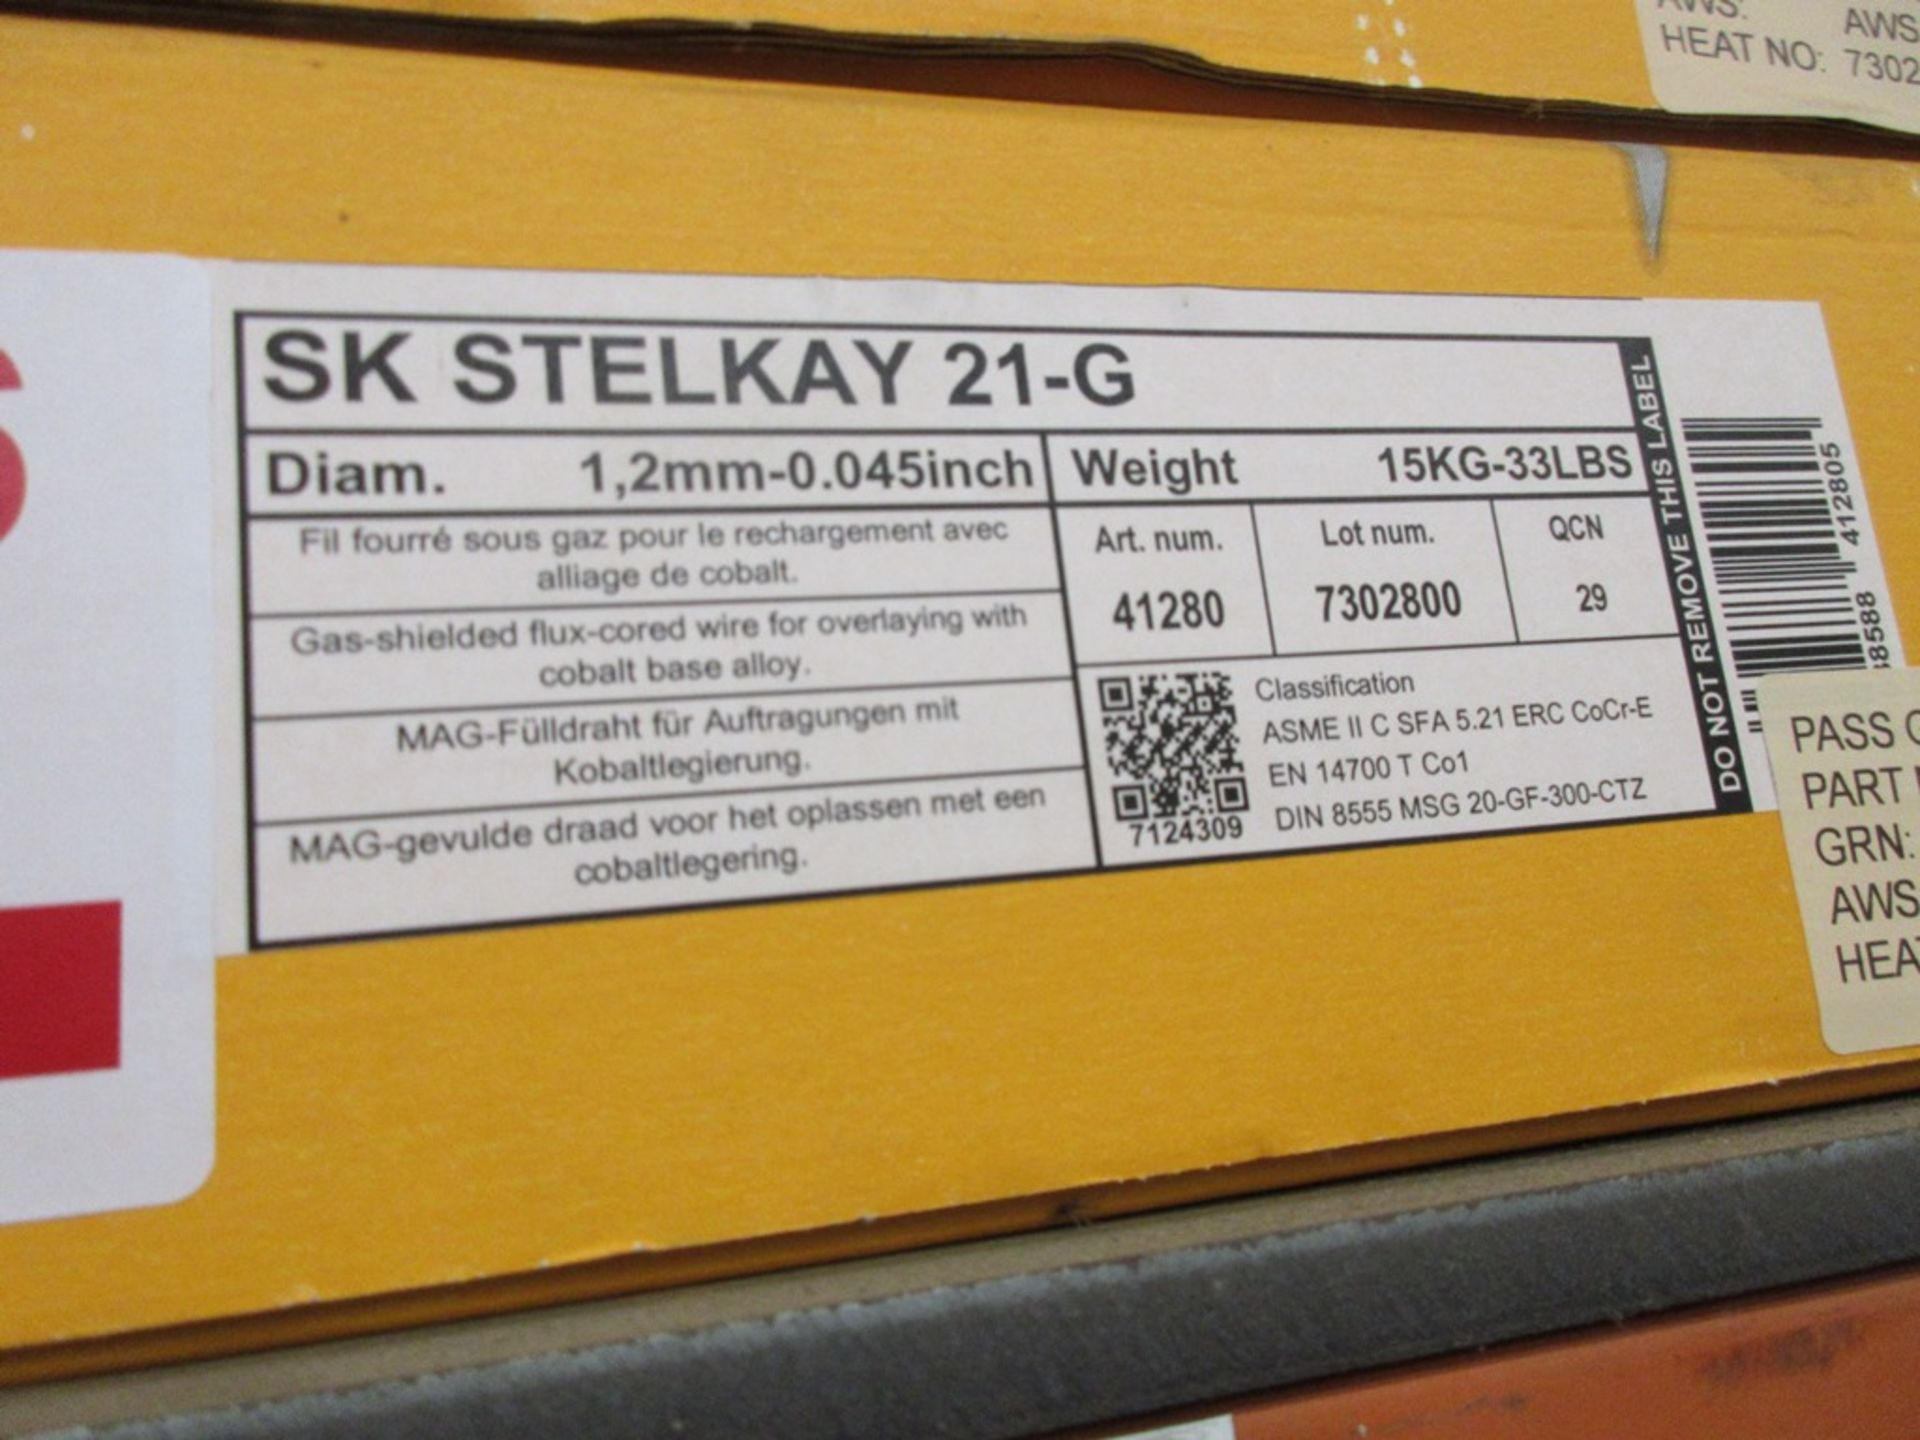 Four reels of SR Stelkay 21-G welding wire, part no. ERCOCRMO 21G/1.2 - Image 2 of 3